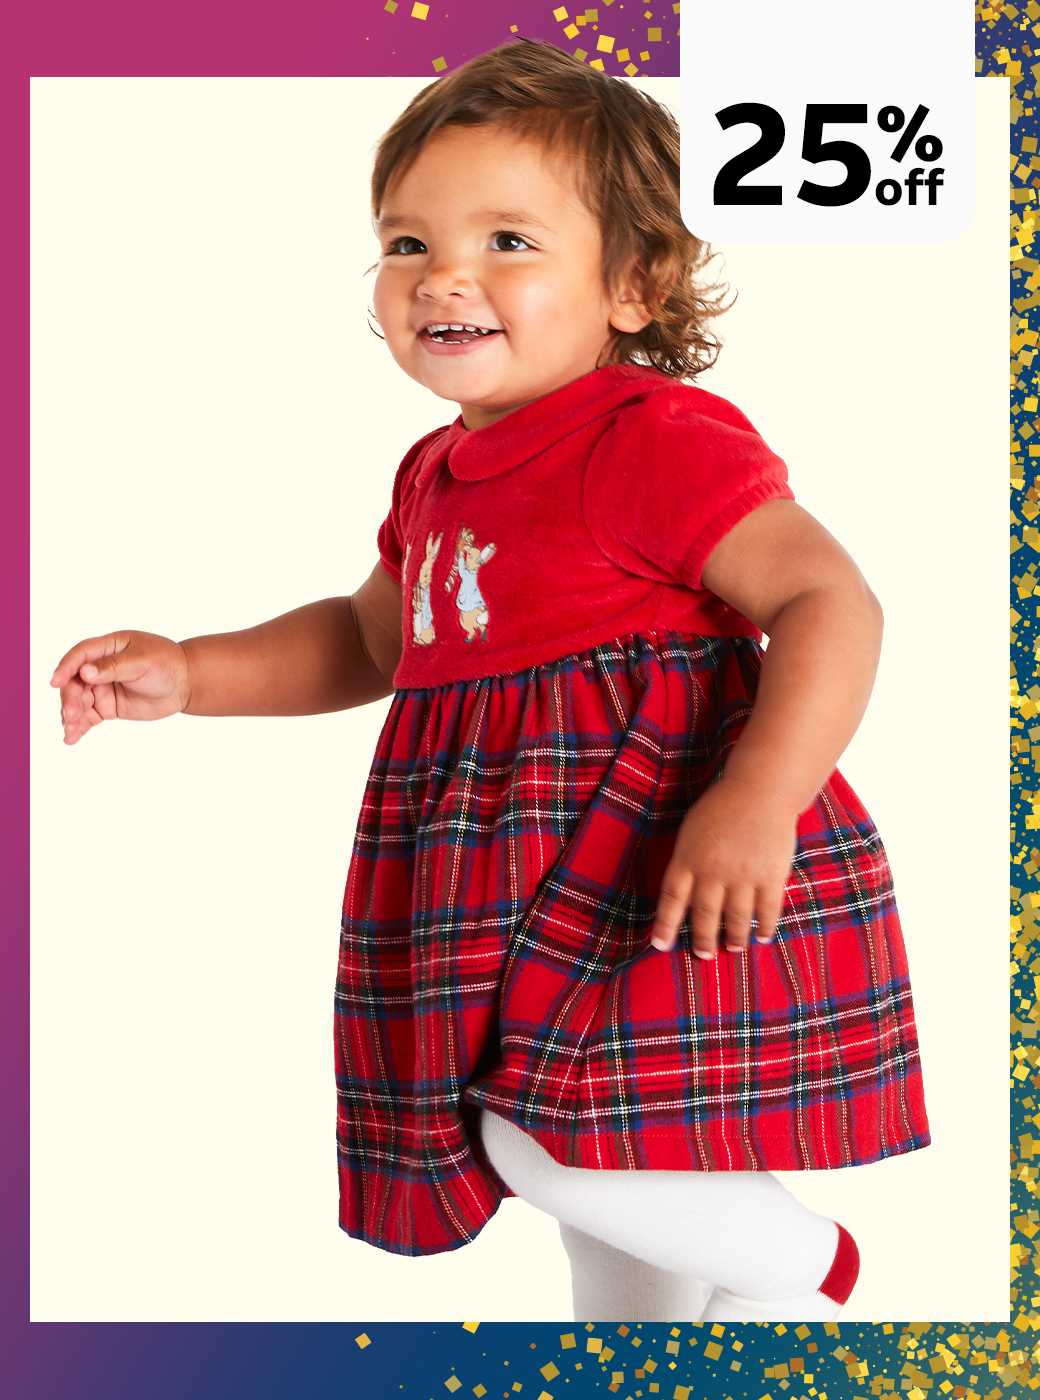 25% off selected styles. Celebrate baby's 1st Christmas.